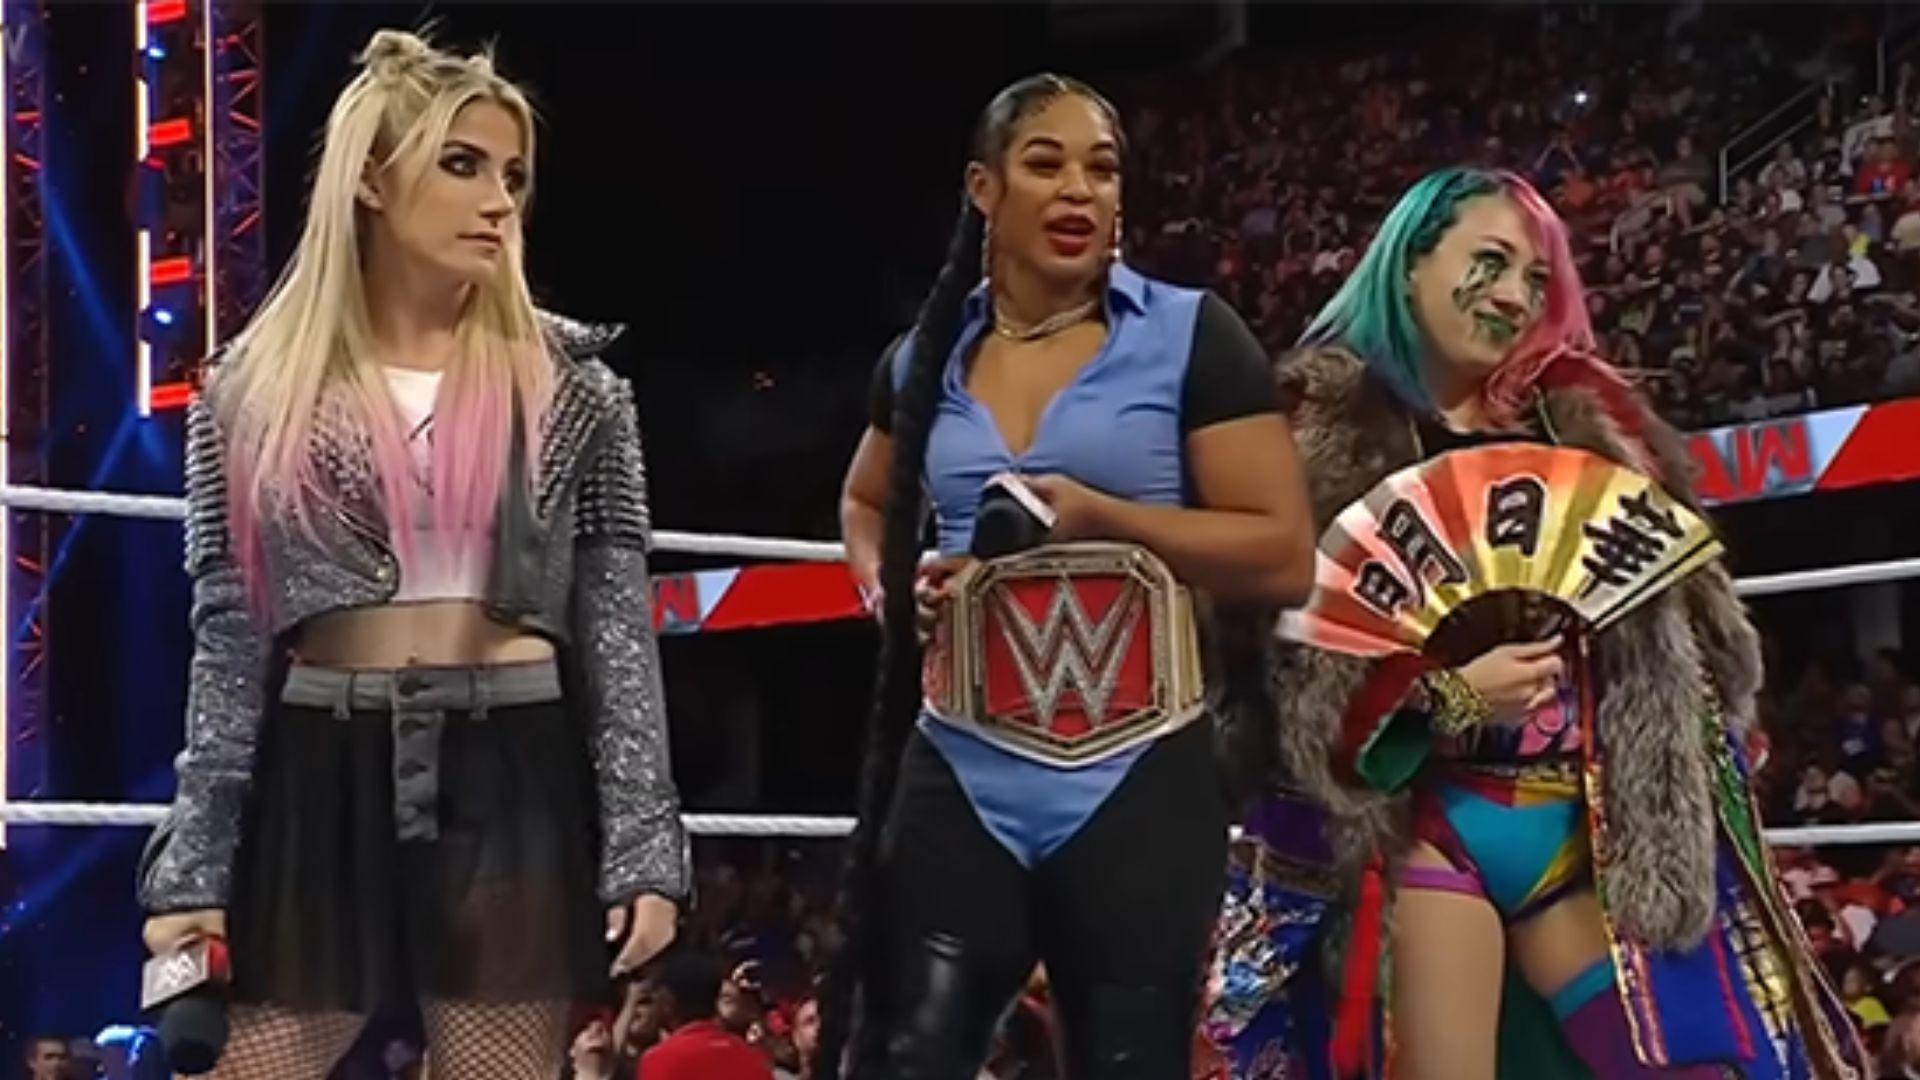 Alexa Bliss and Bianca Belair have teamed up several times in the second half of 2022